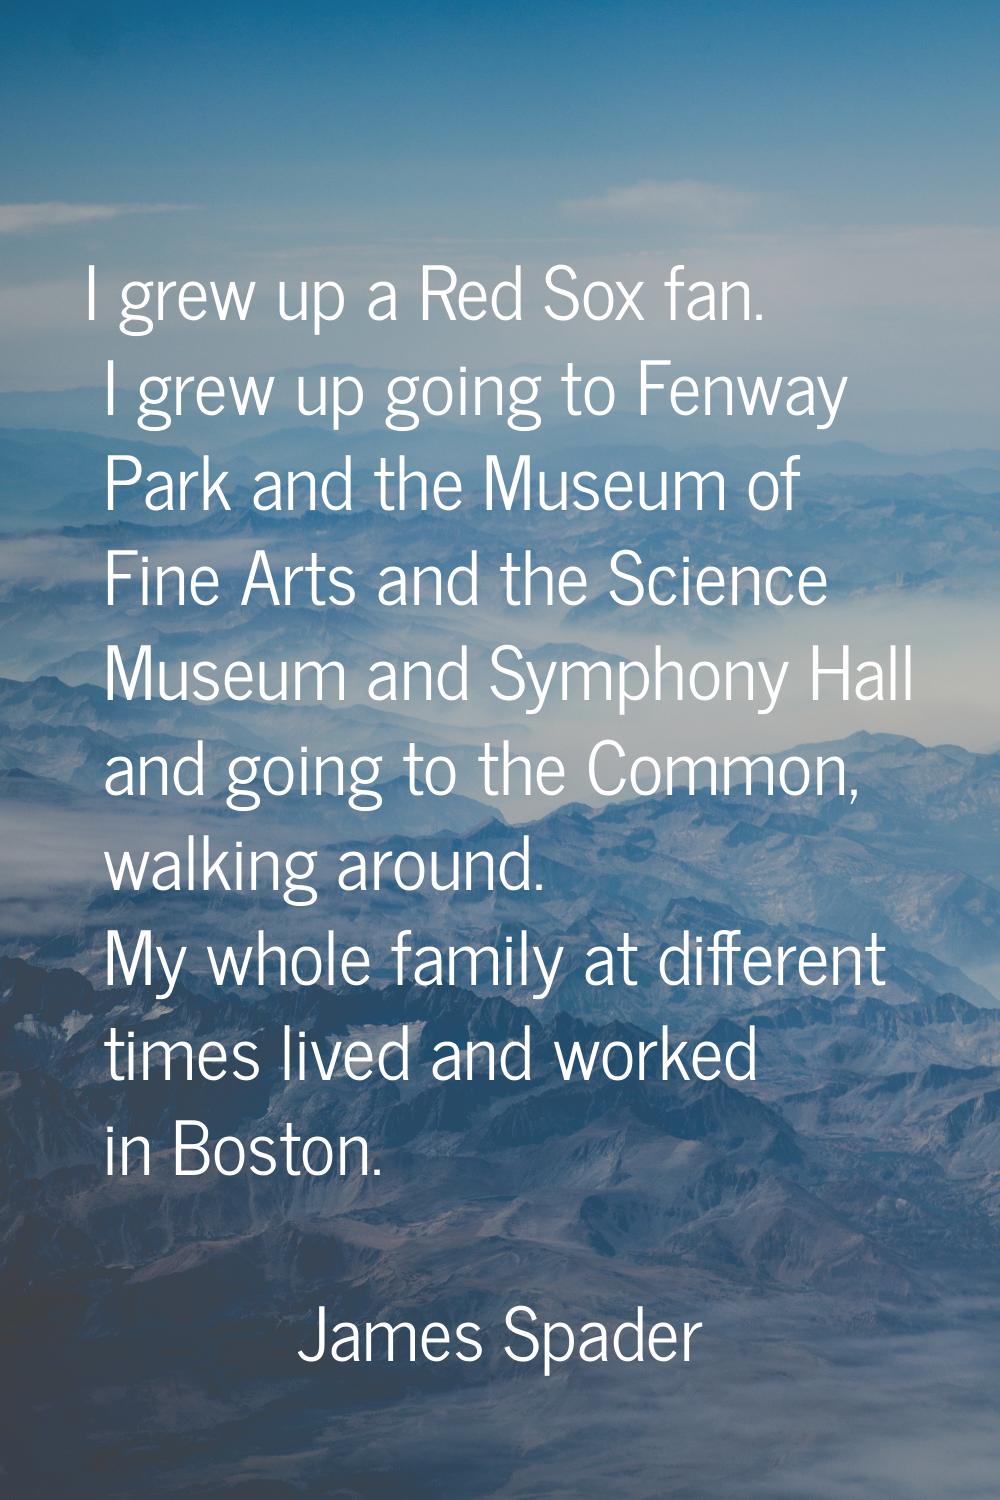 I grew up a Red Sox fan. I grew up going to Fenway Park and the Museum of Fine Arts and the Science